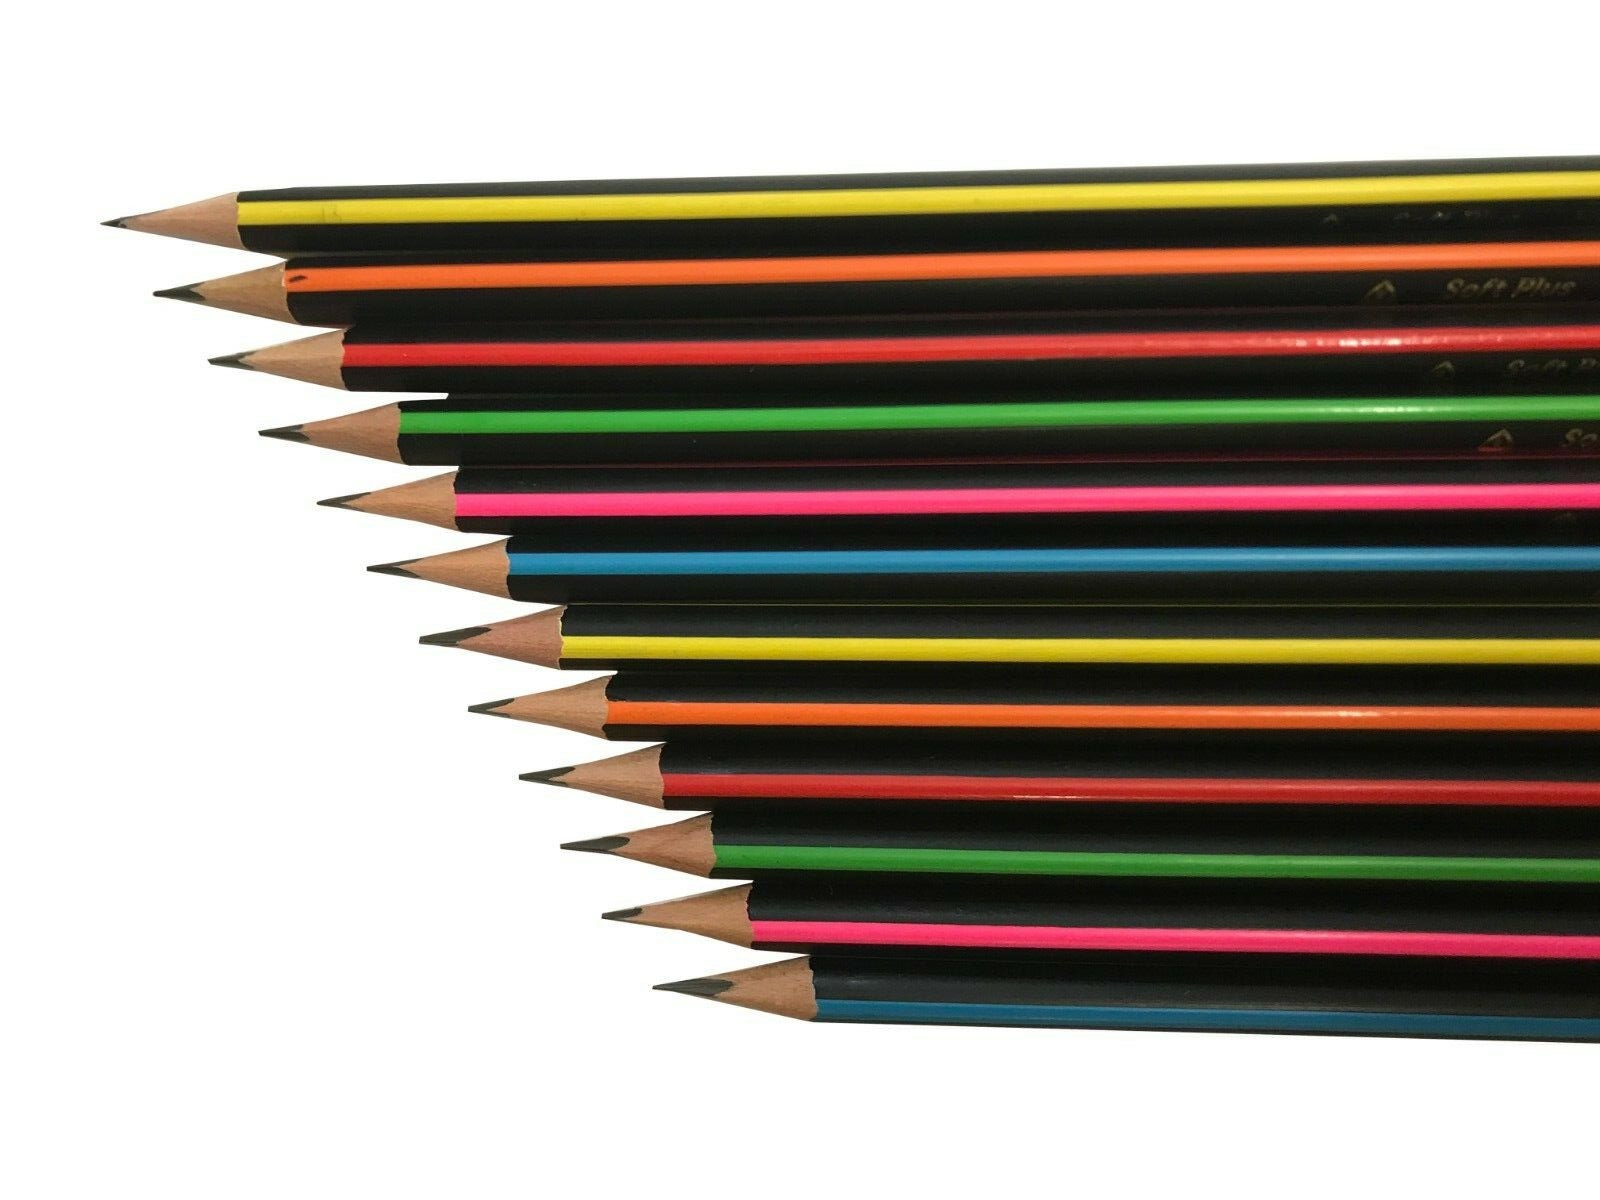 Faber-castell Pencil Set Triangular Grip Drawing and Writing Pencils With  Eraser Tips Sharpener and Dust-free Eraser Included School Set 